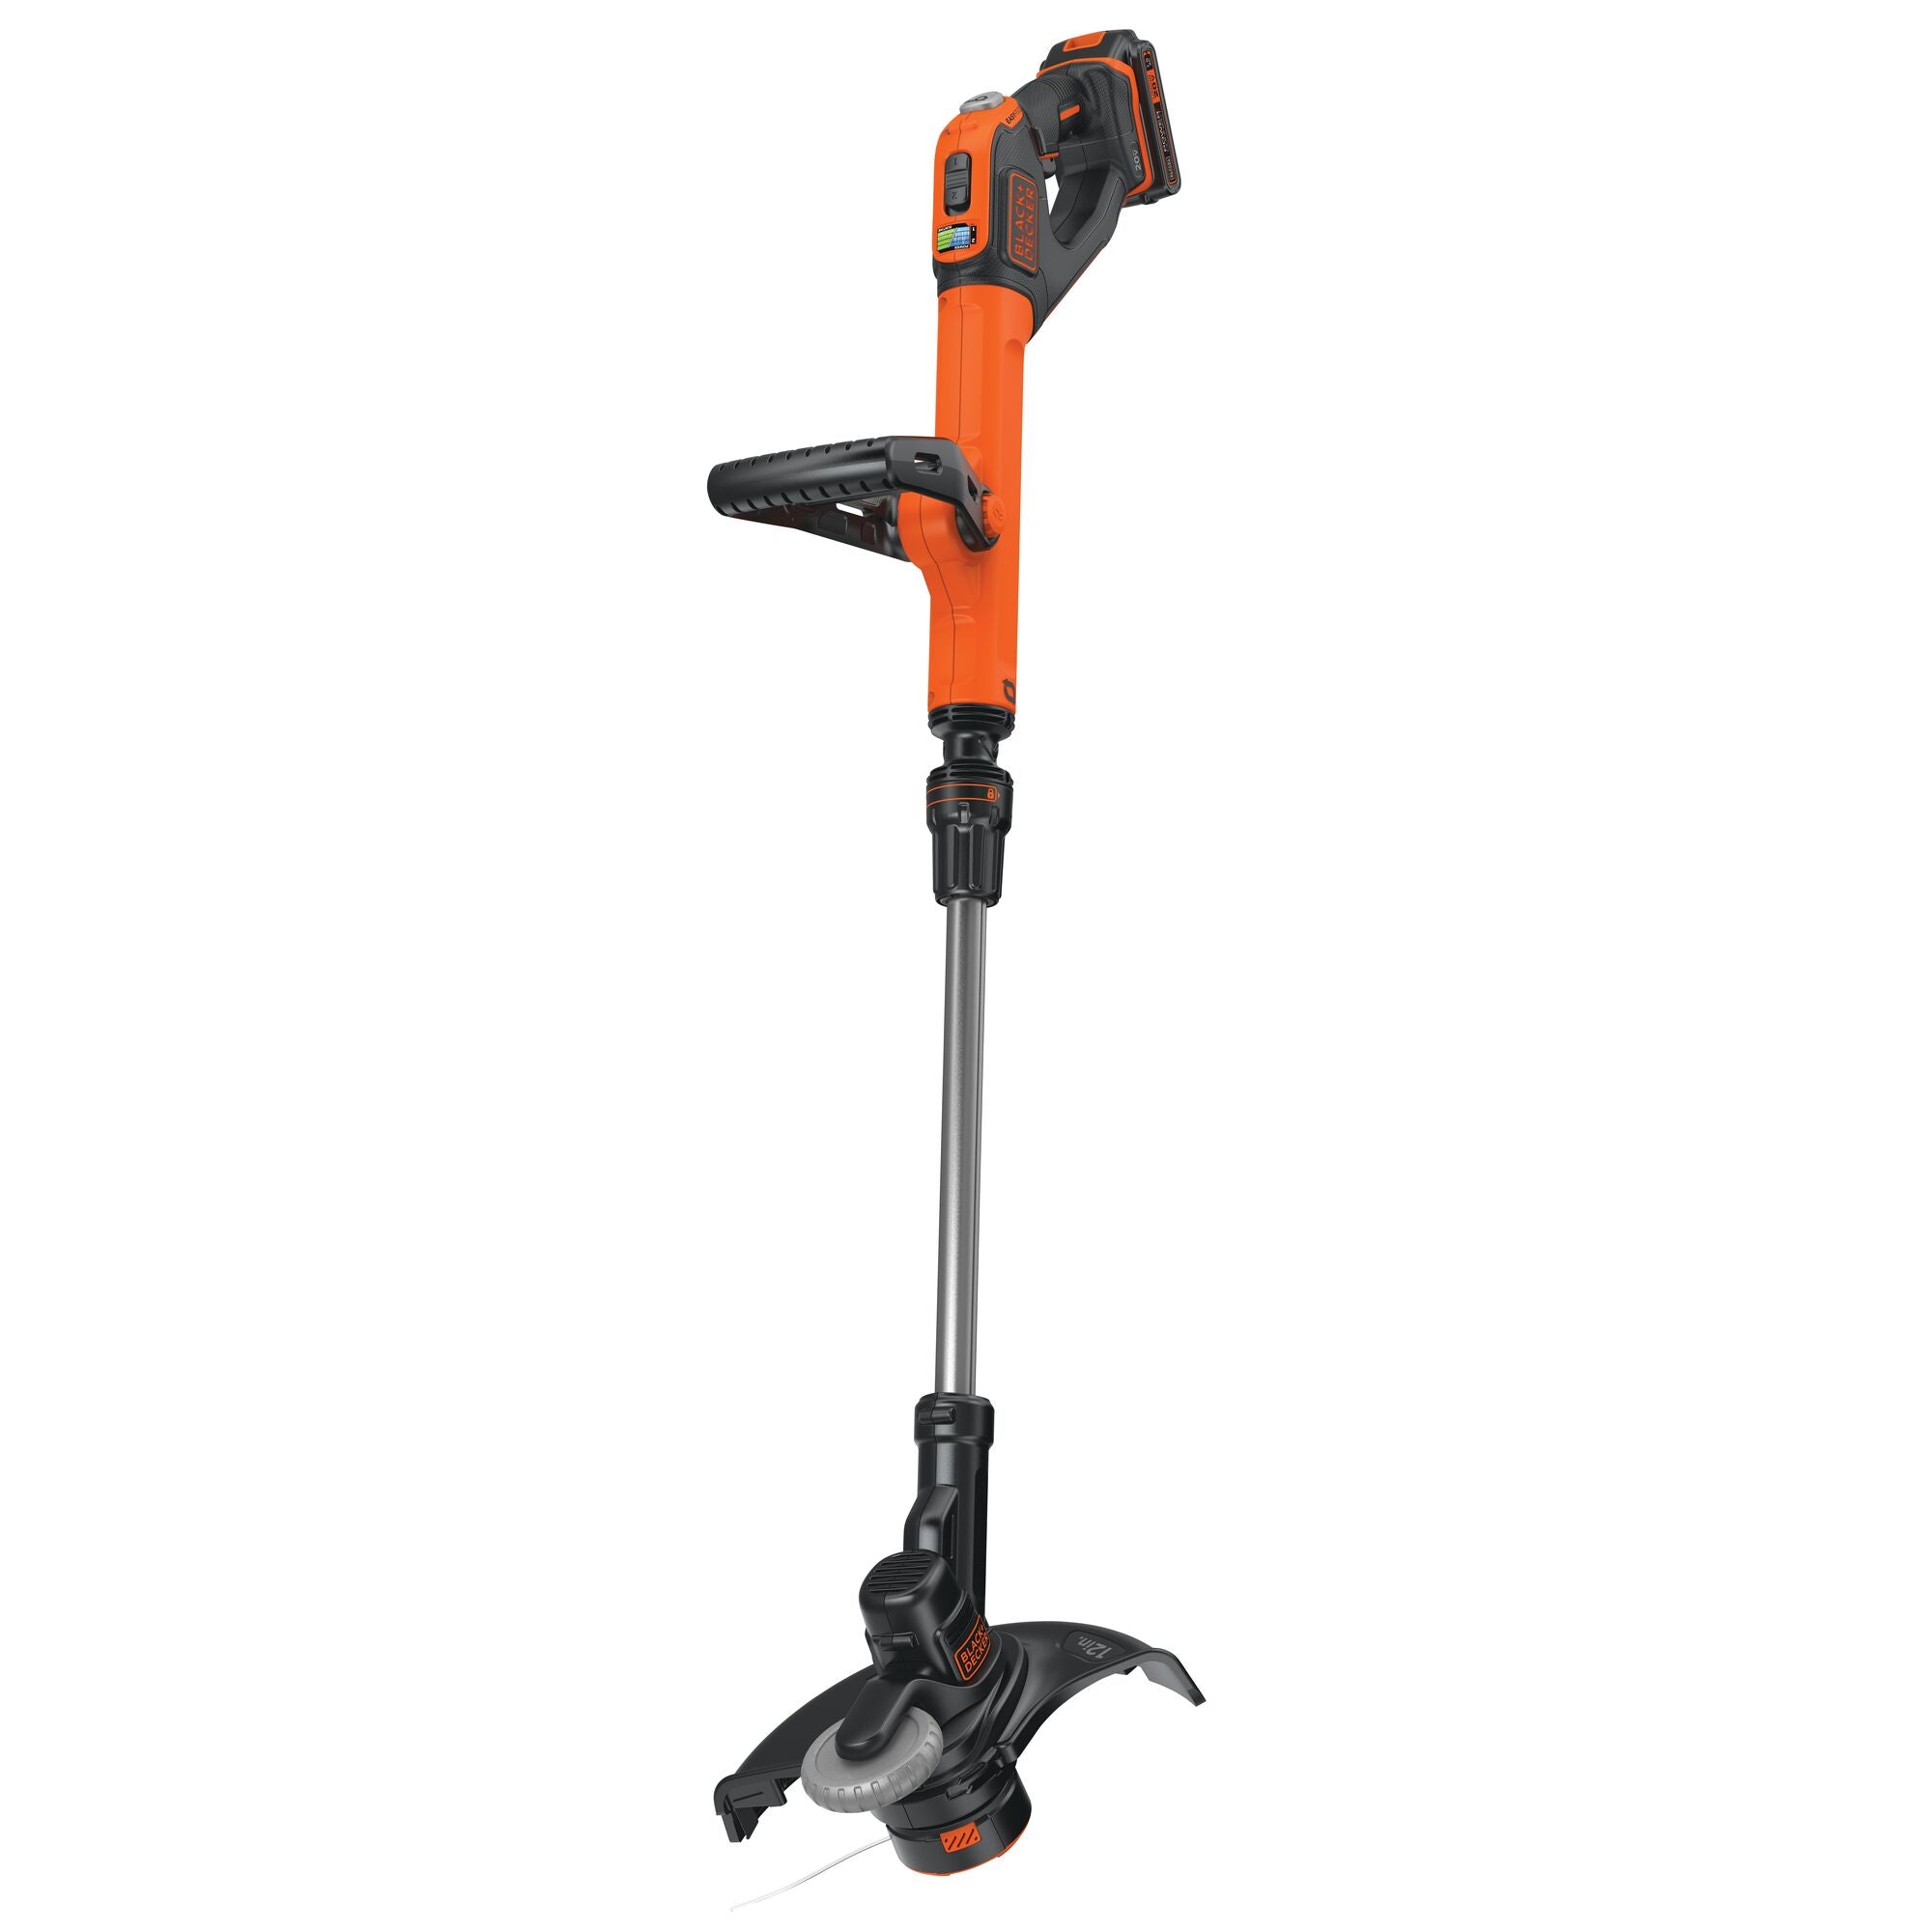 BLACK DECKER 20V Max Pole Saw for Tree Trimming, Cordless, with Extension up to 14 ft., Bare Tool Only (LPP120B) - 4